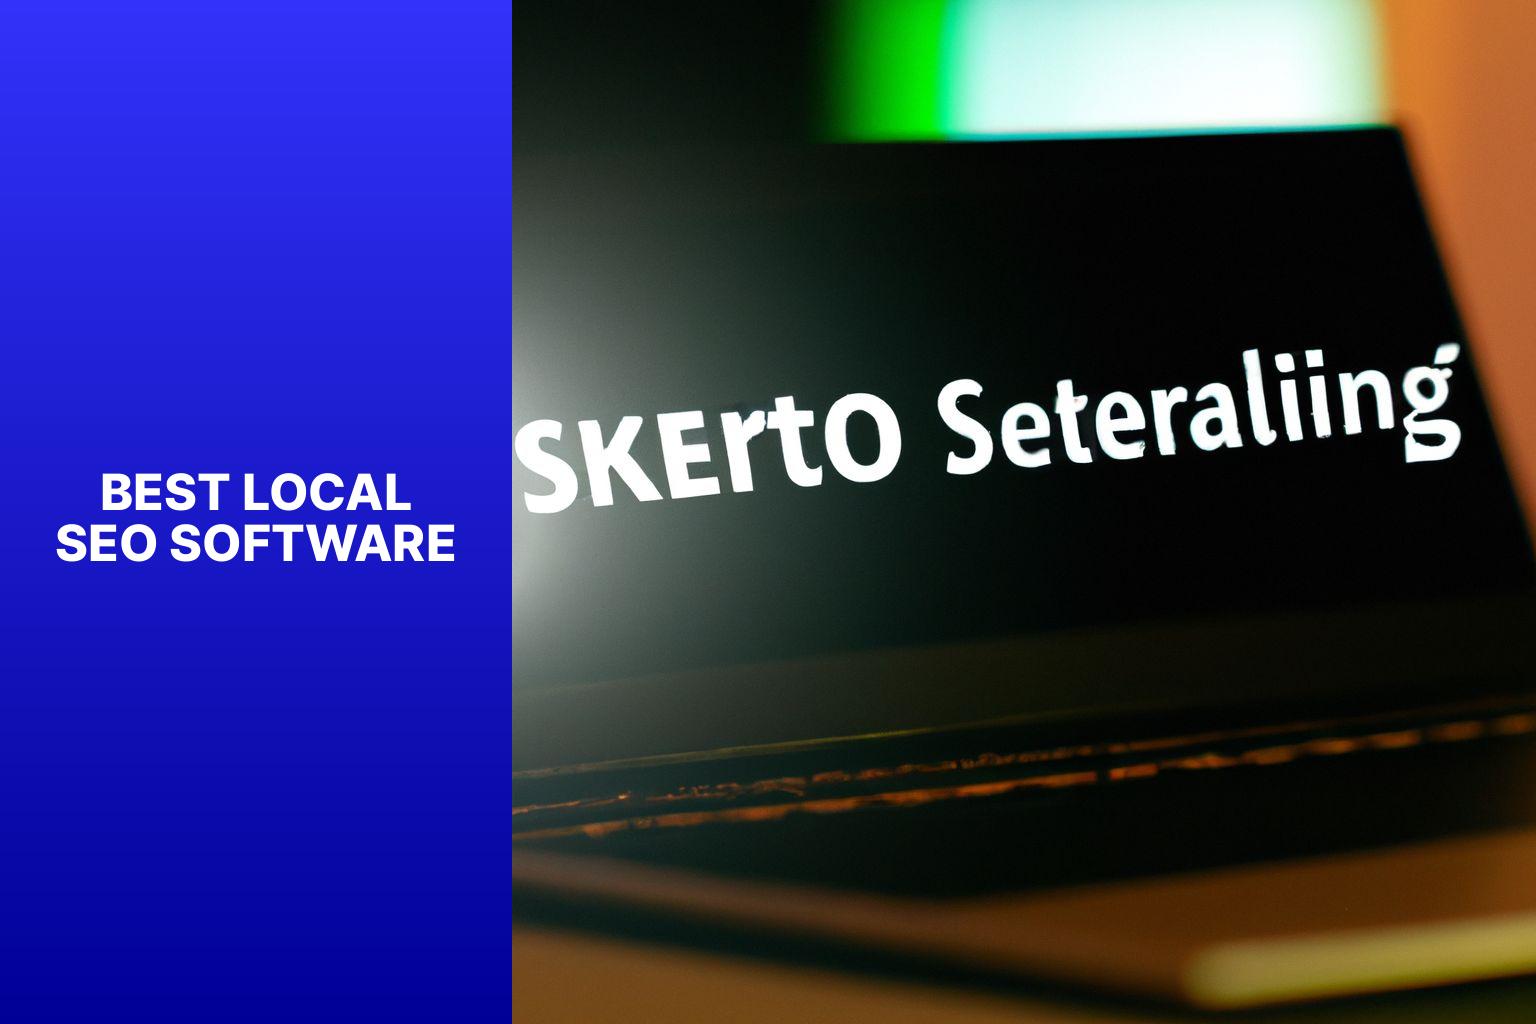 best local seo software